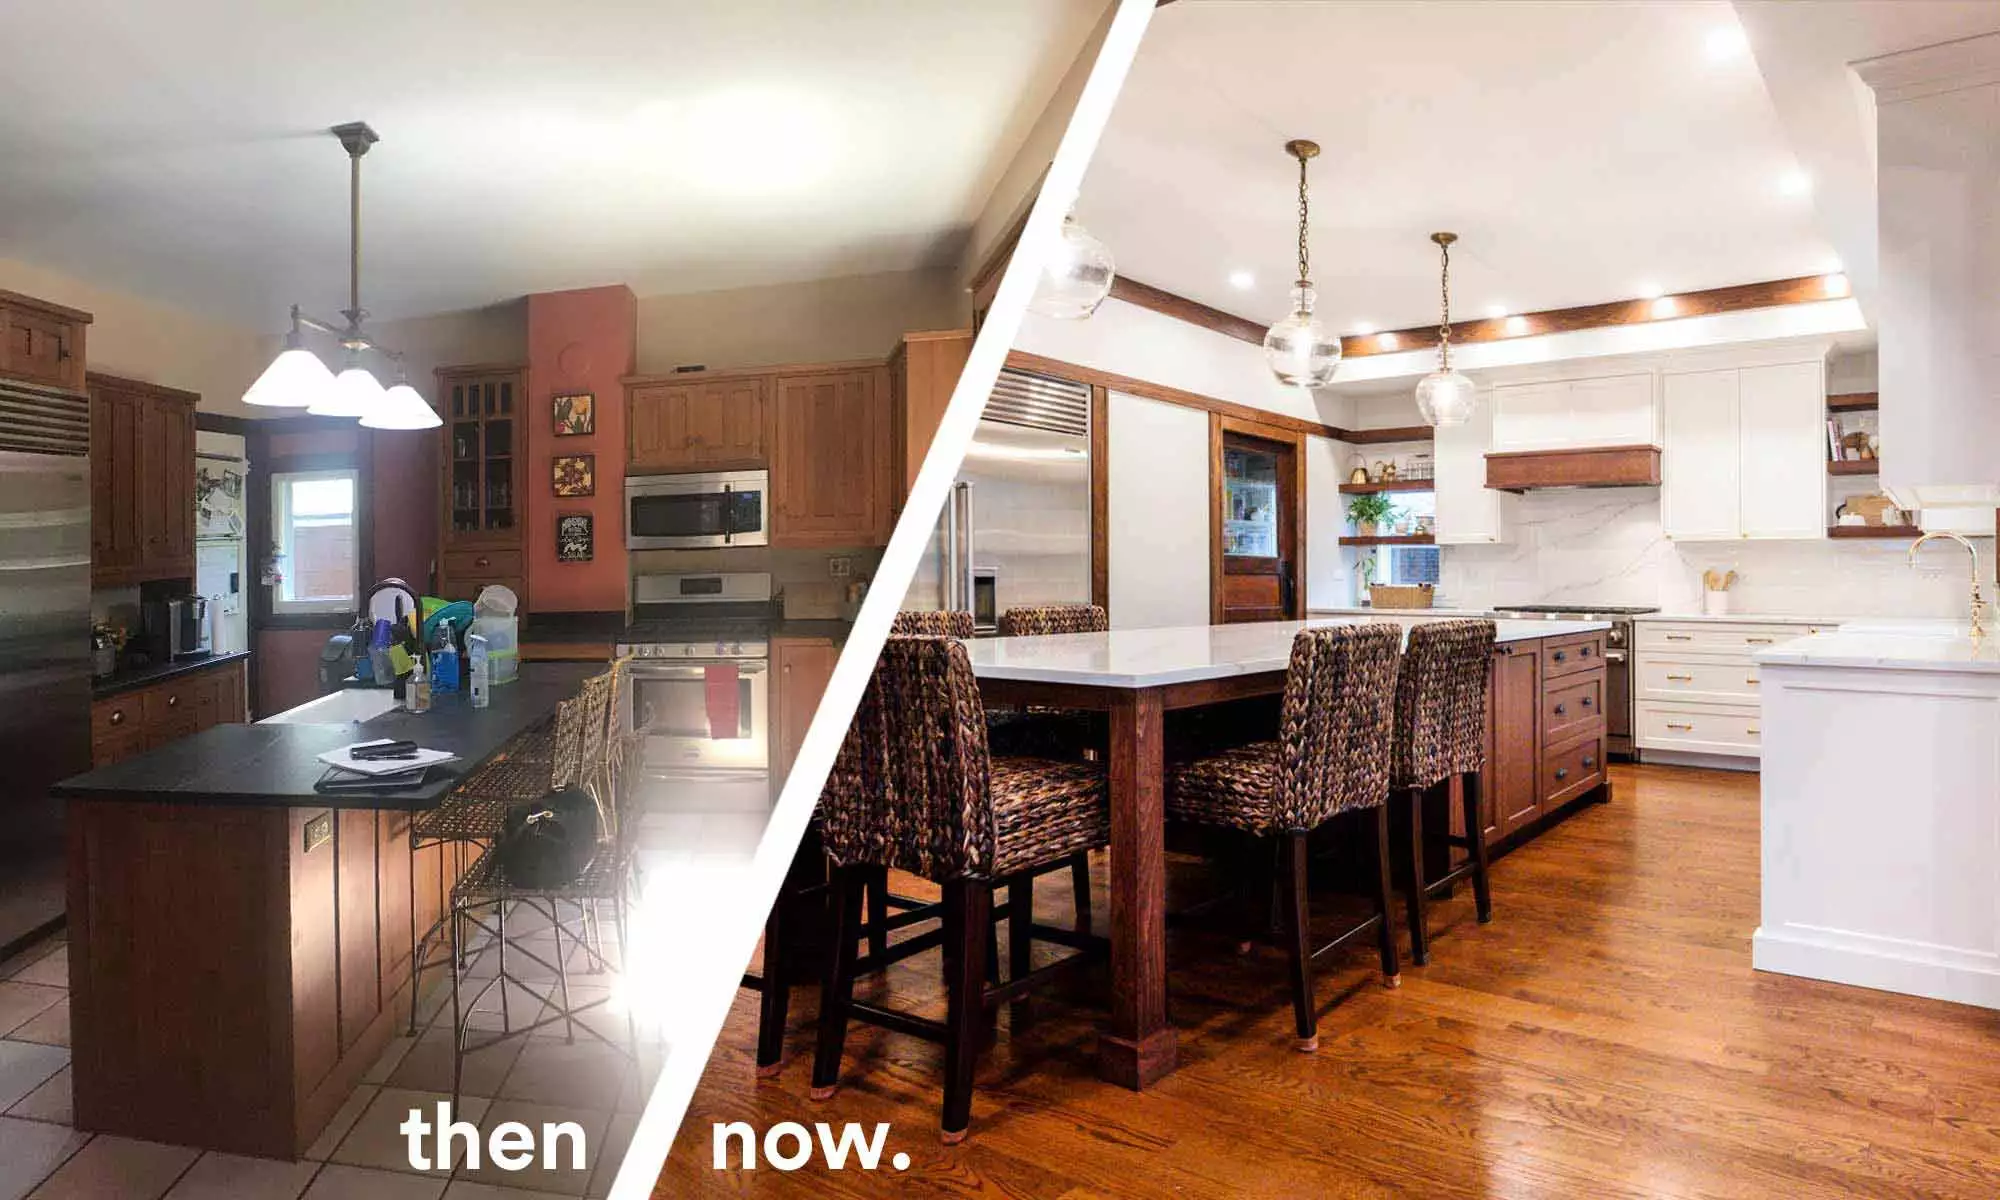 Before and after interior view of a luxury craftsman kitchen remodel